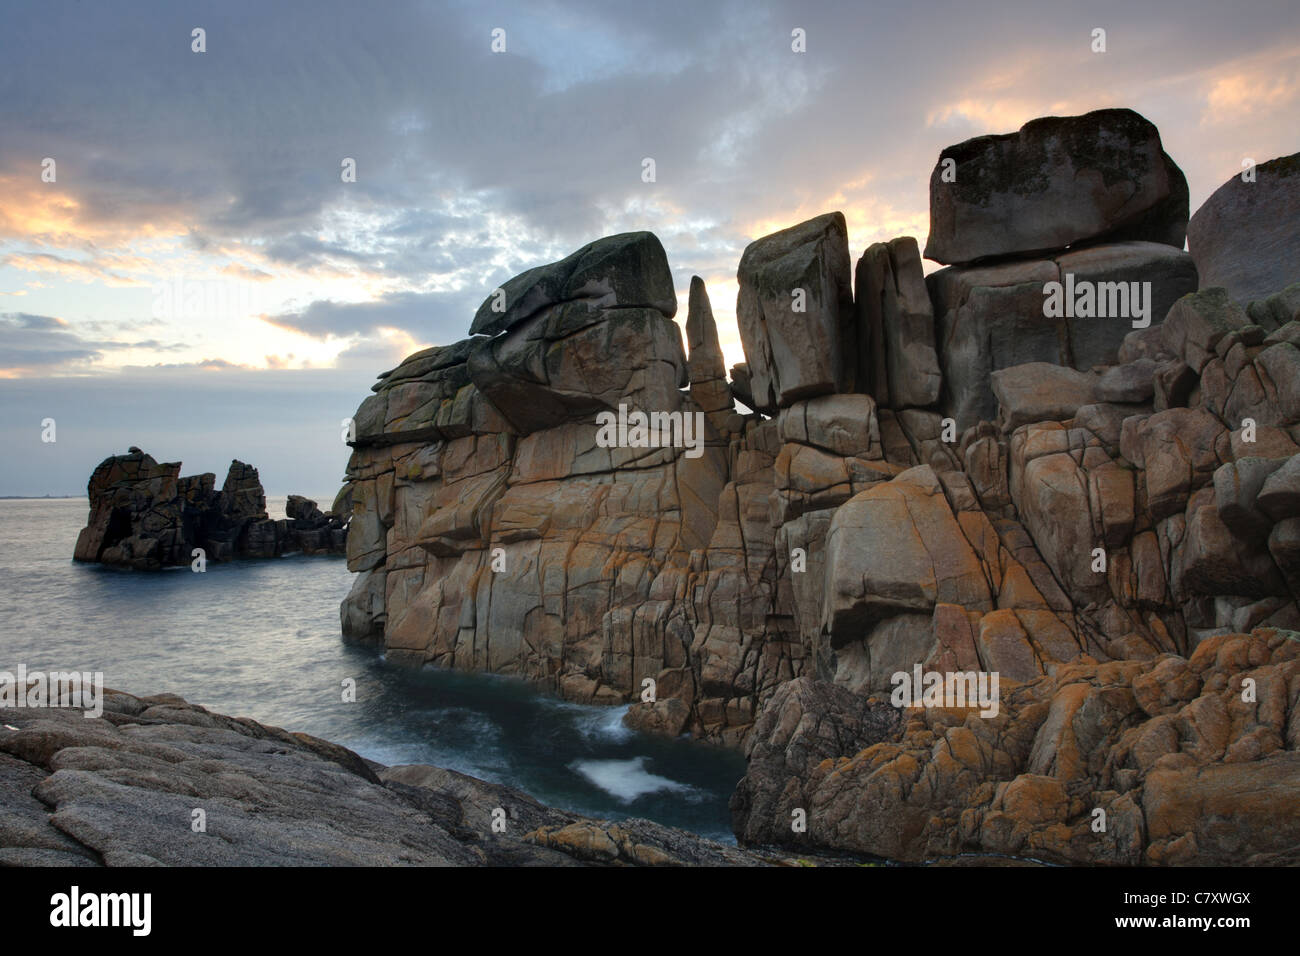 Peninnis Head, St Marys, Isles of Scilly, Cornwall, UK, granite rock formations. Stock Photo